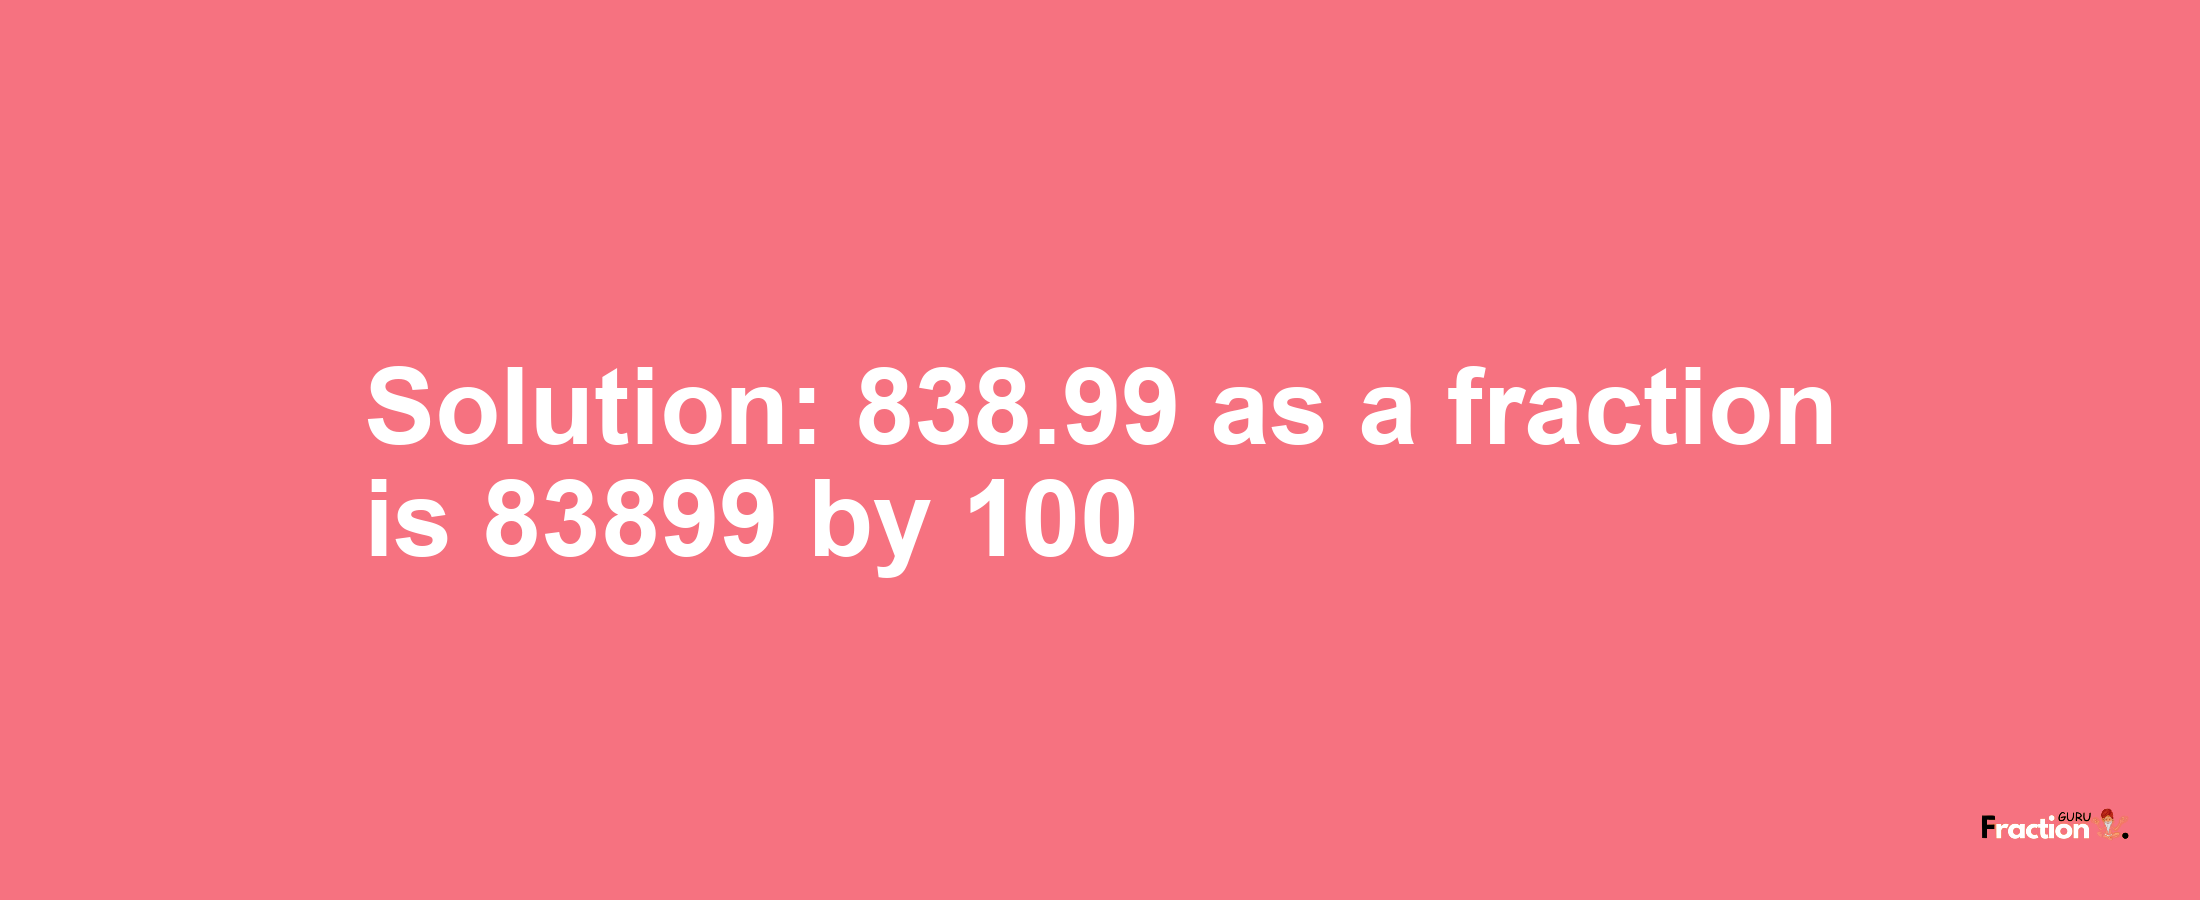 Solution:838.99 as a fraction is 83899/100